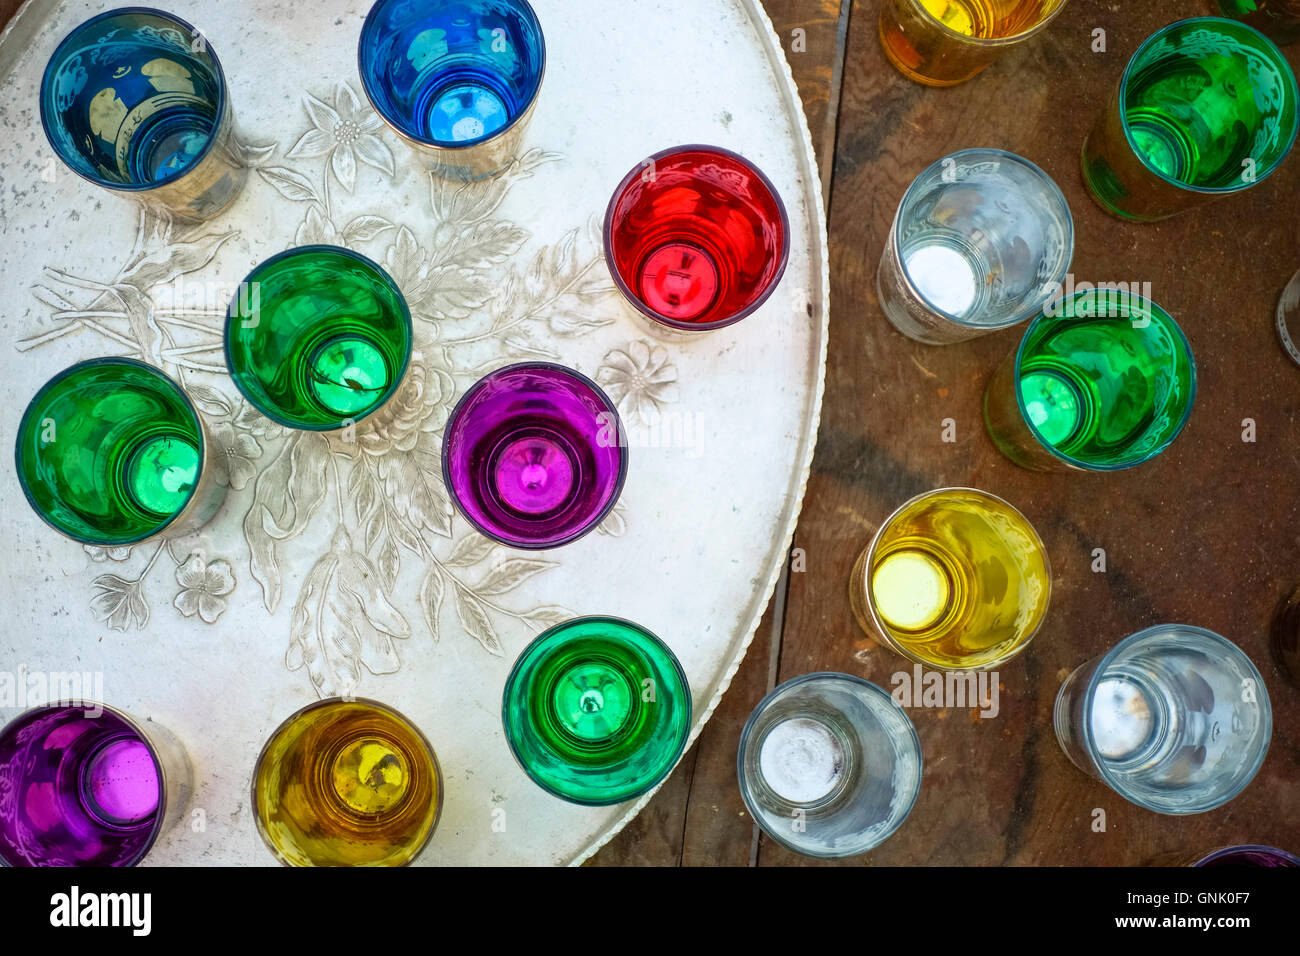 Group of colourful moroccan tea glasses on engraved serving tray. Stock Photo